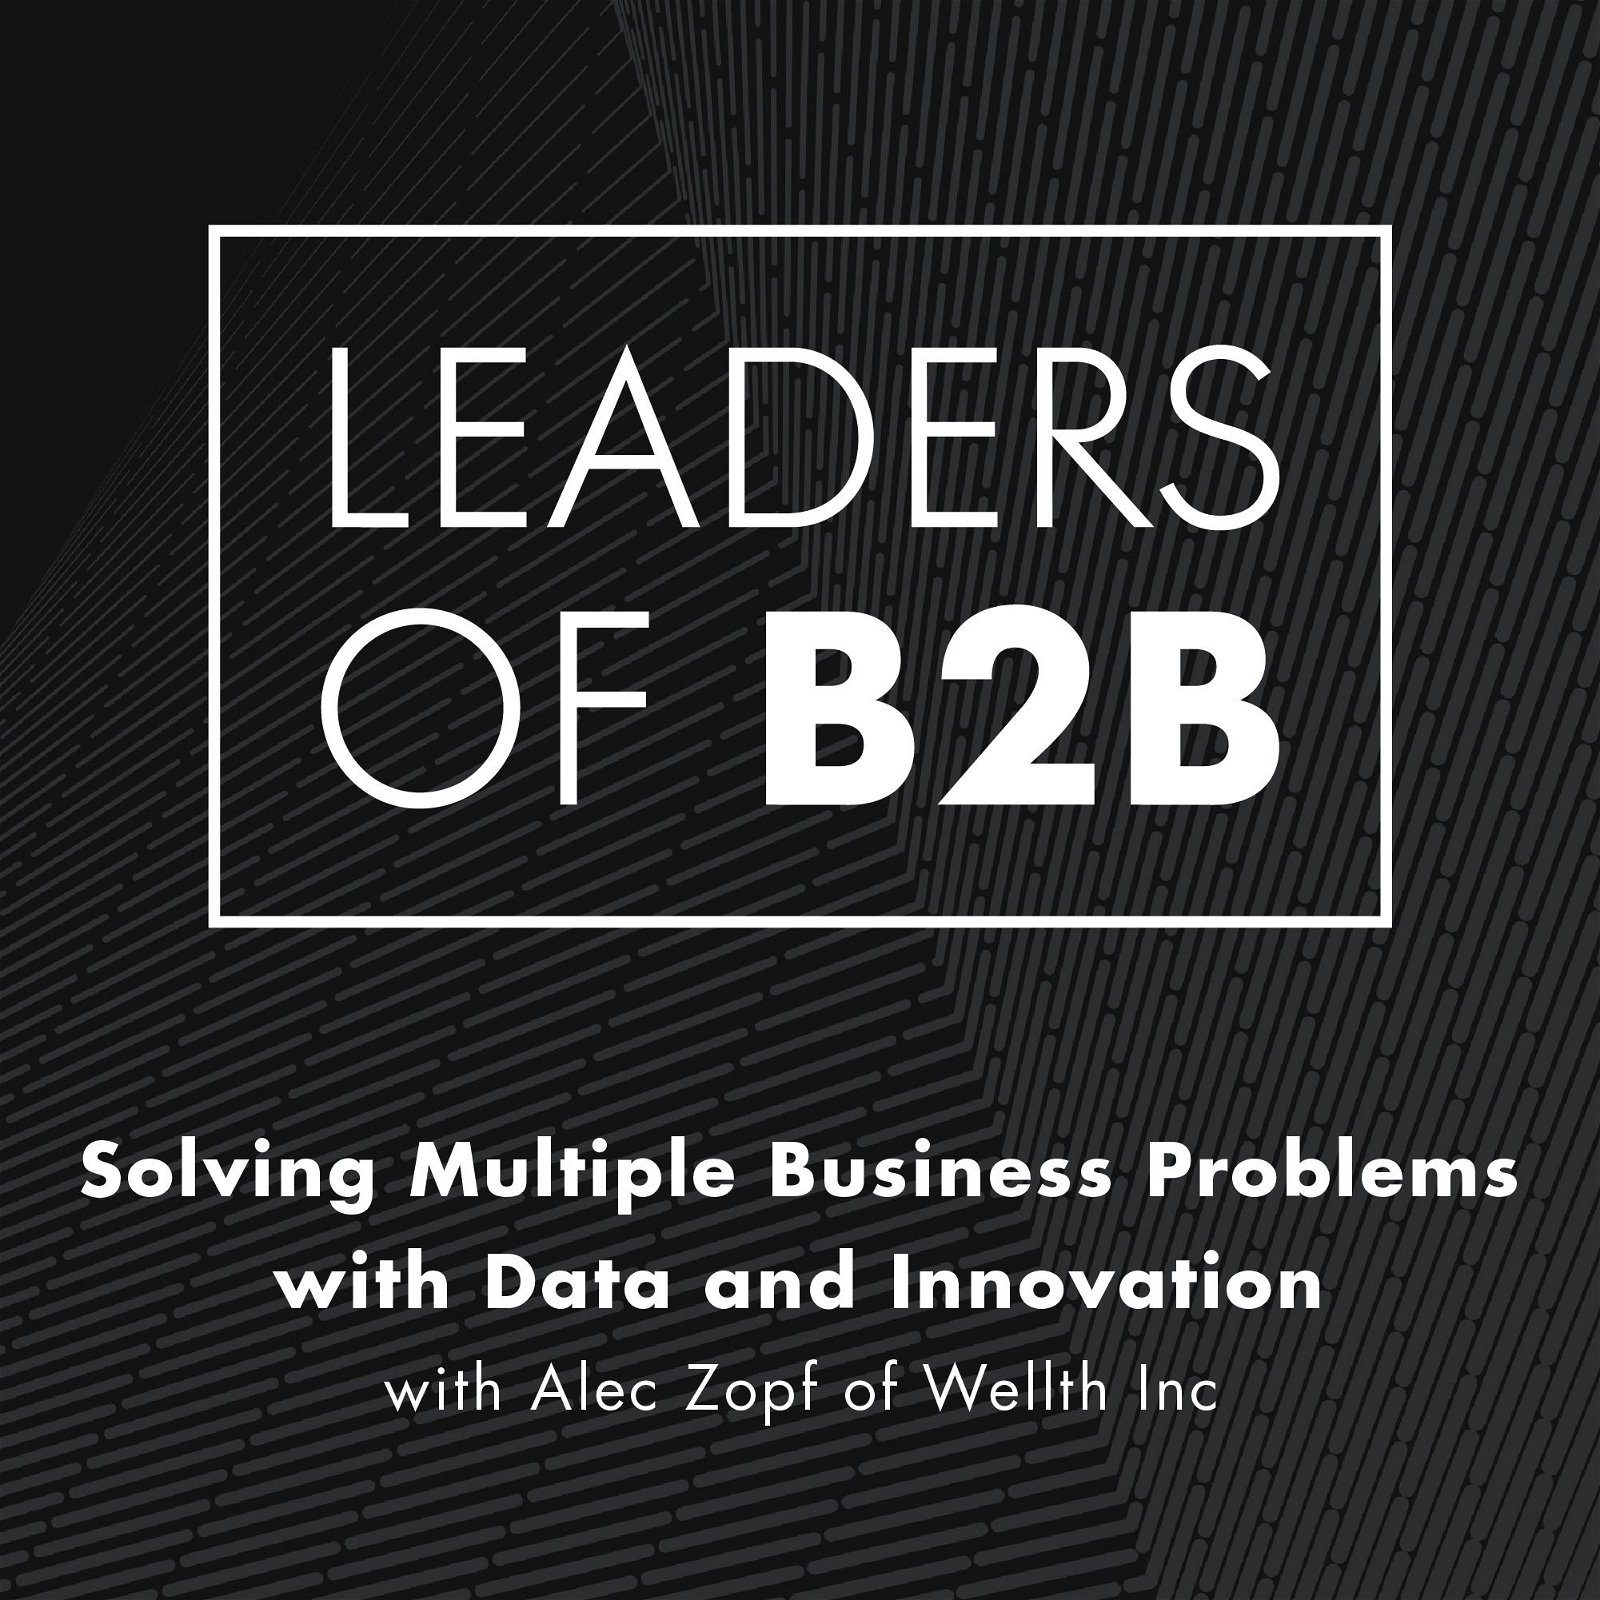 Solving Multiple Business Problems with Data and Innovation with Alec Zopf of Wellth Inc.